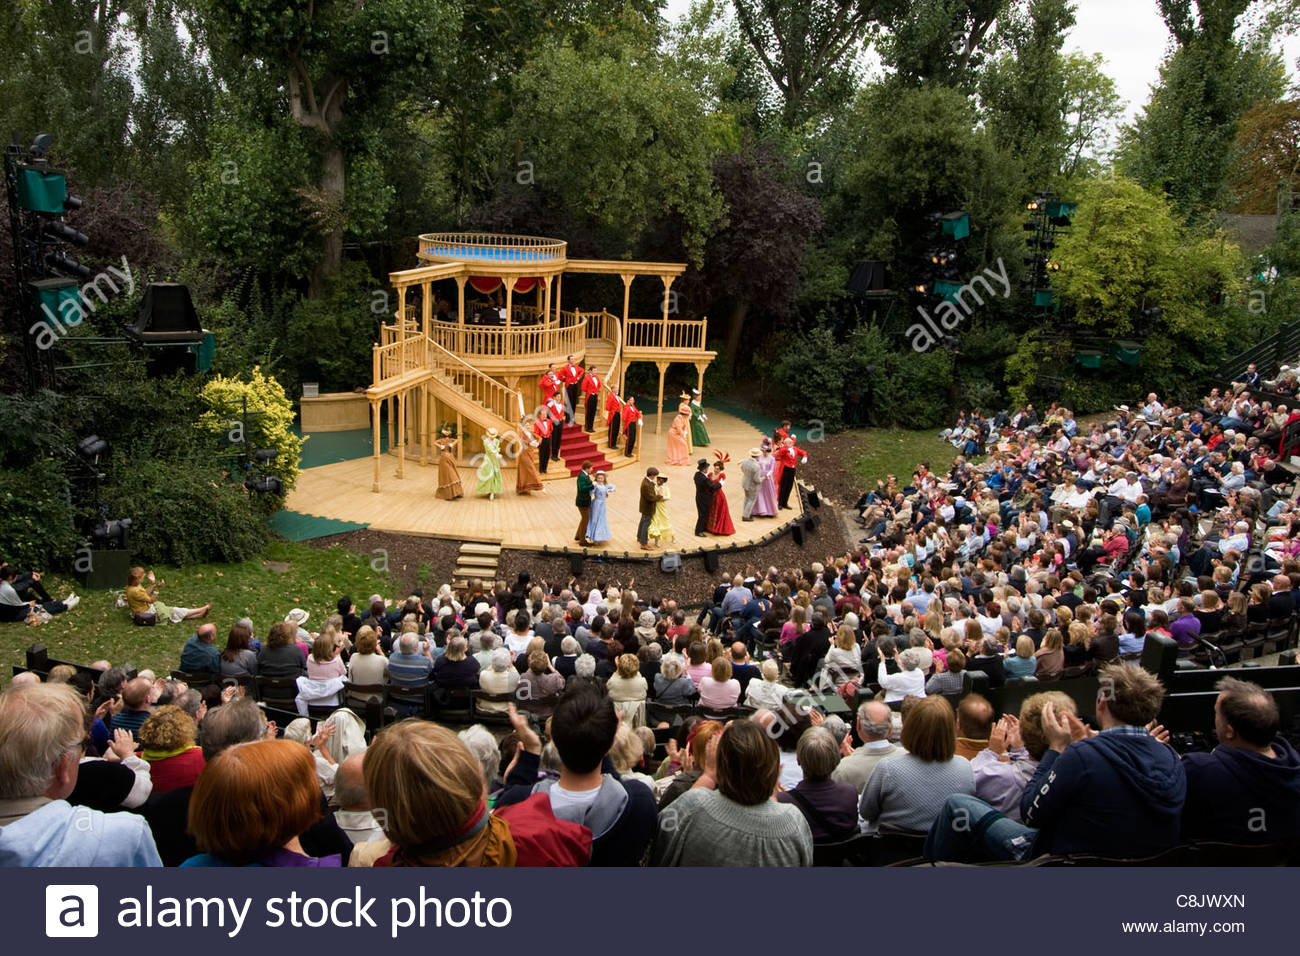 Regents Park Open Air Theatre Seating Chart